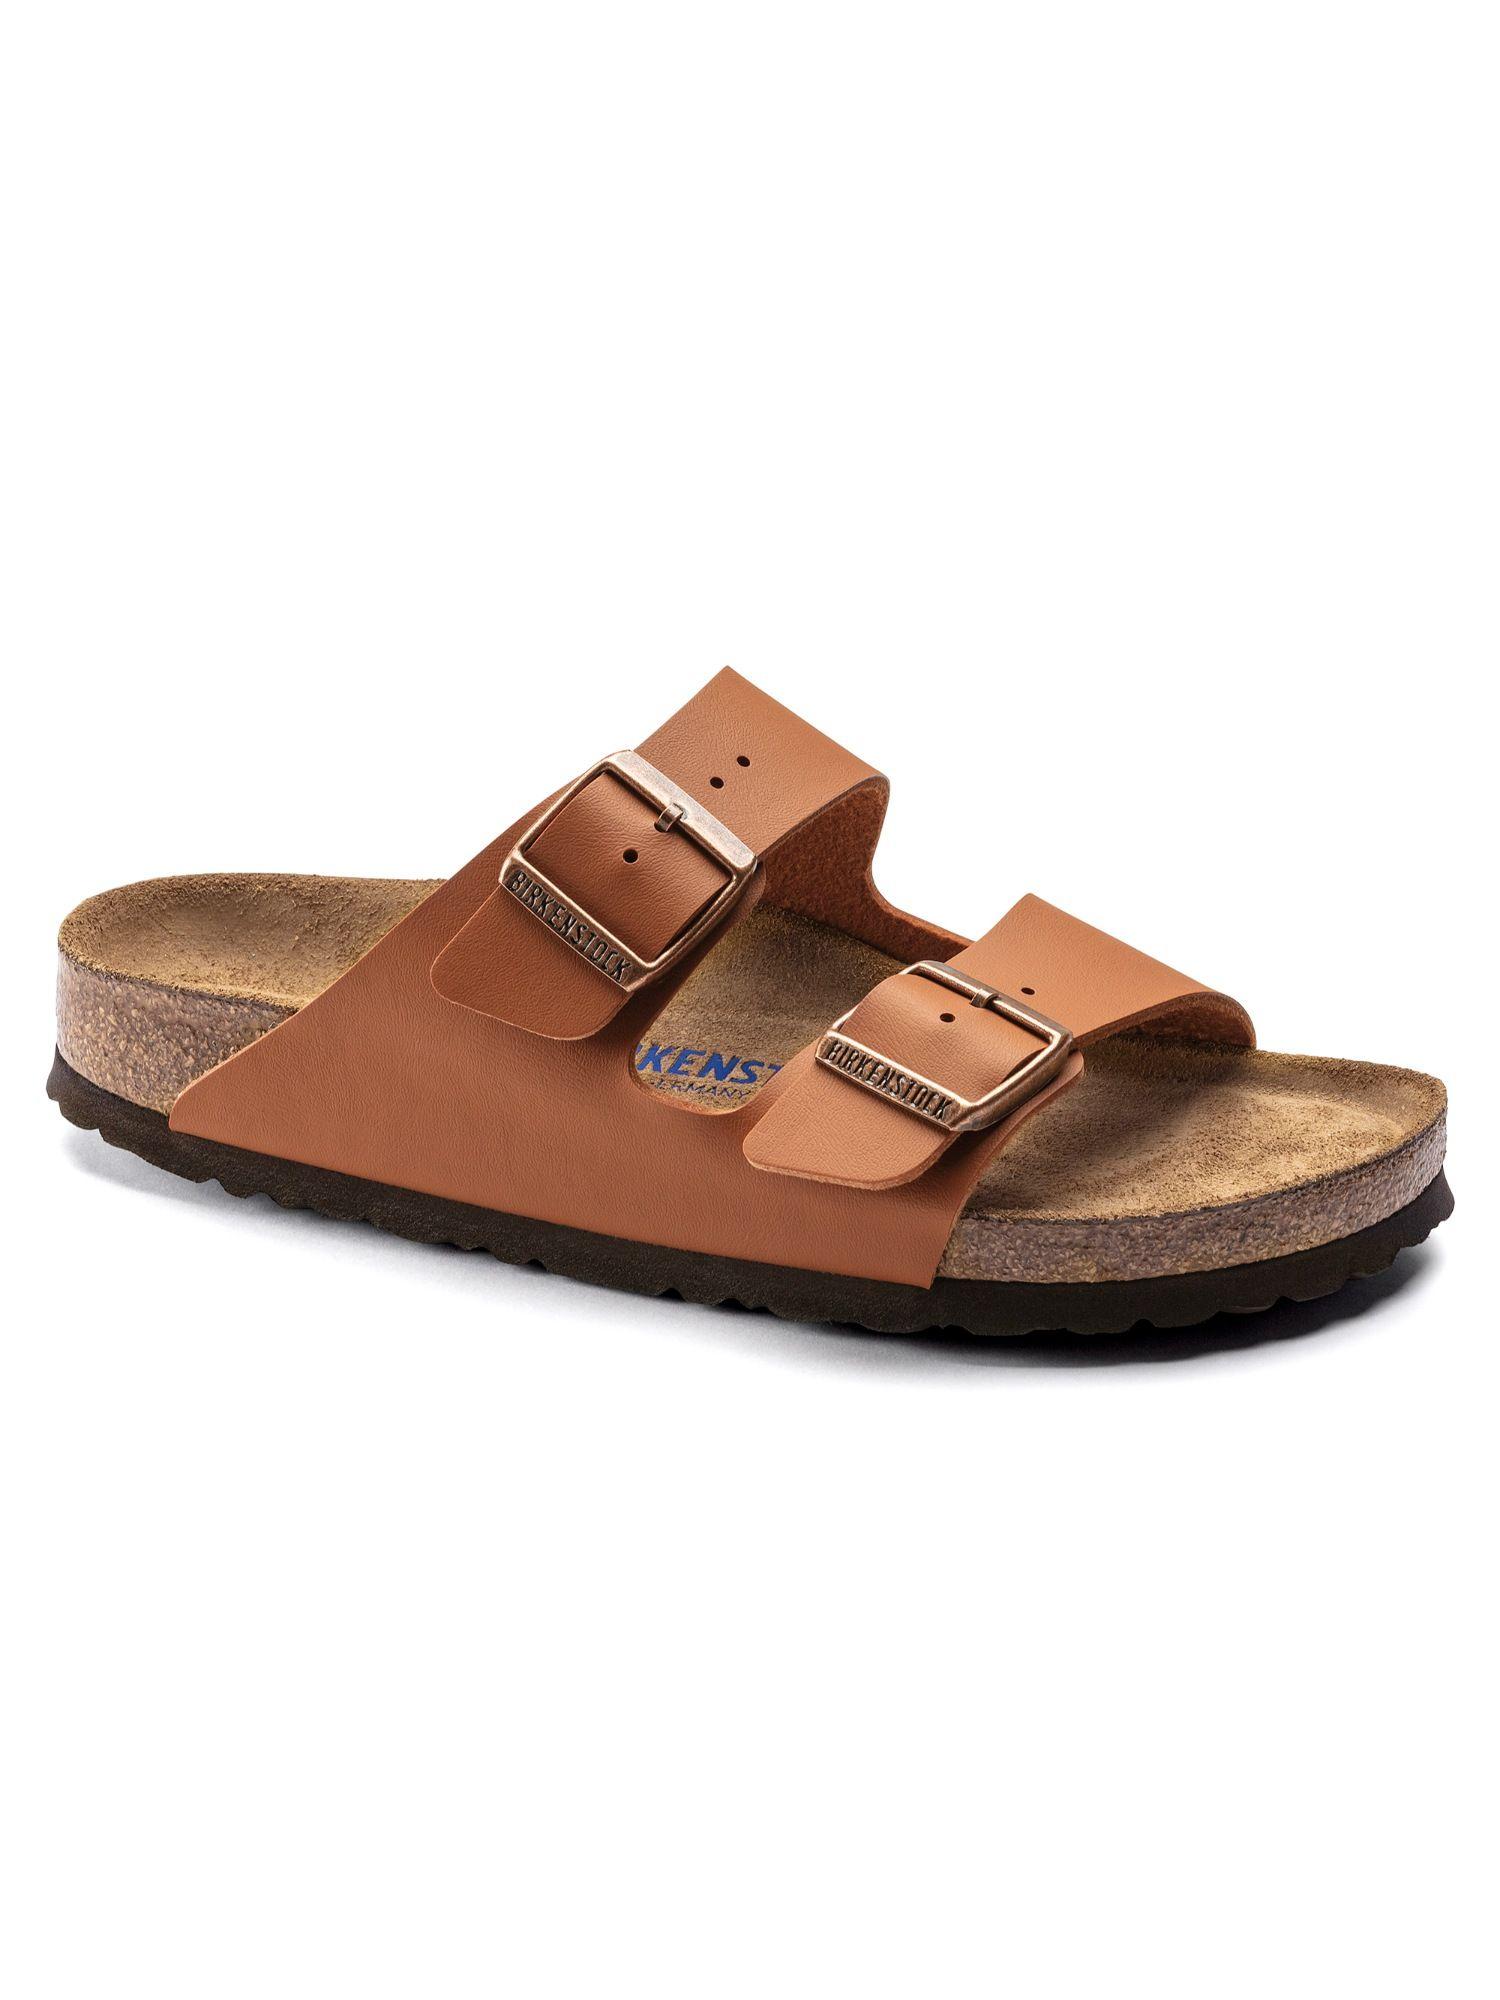 arizona-soft-footbed-solid-brown-narrow-width-unisex-two-strap-sandals